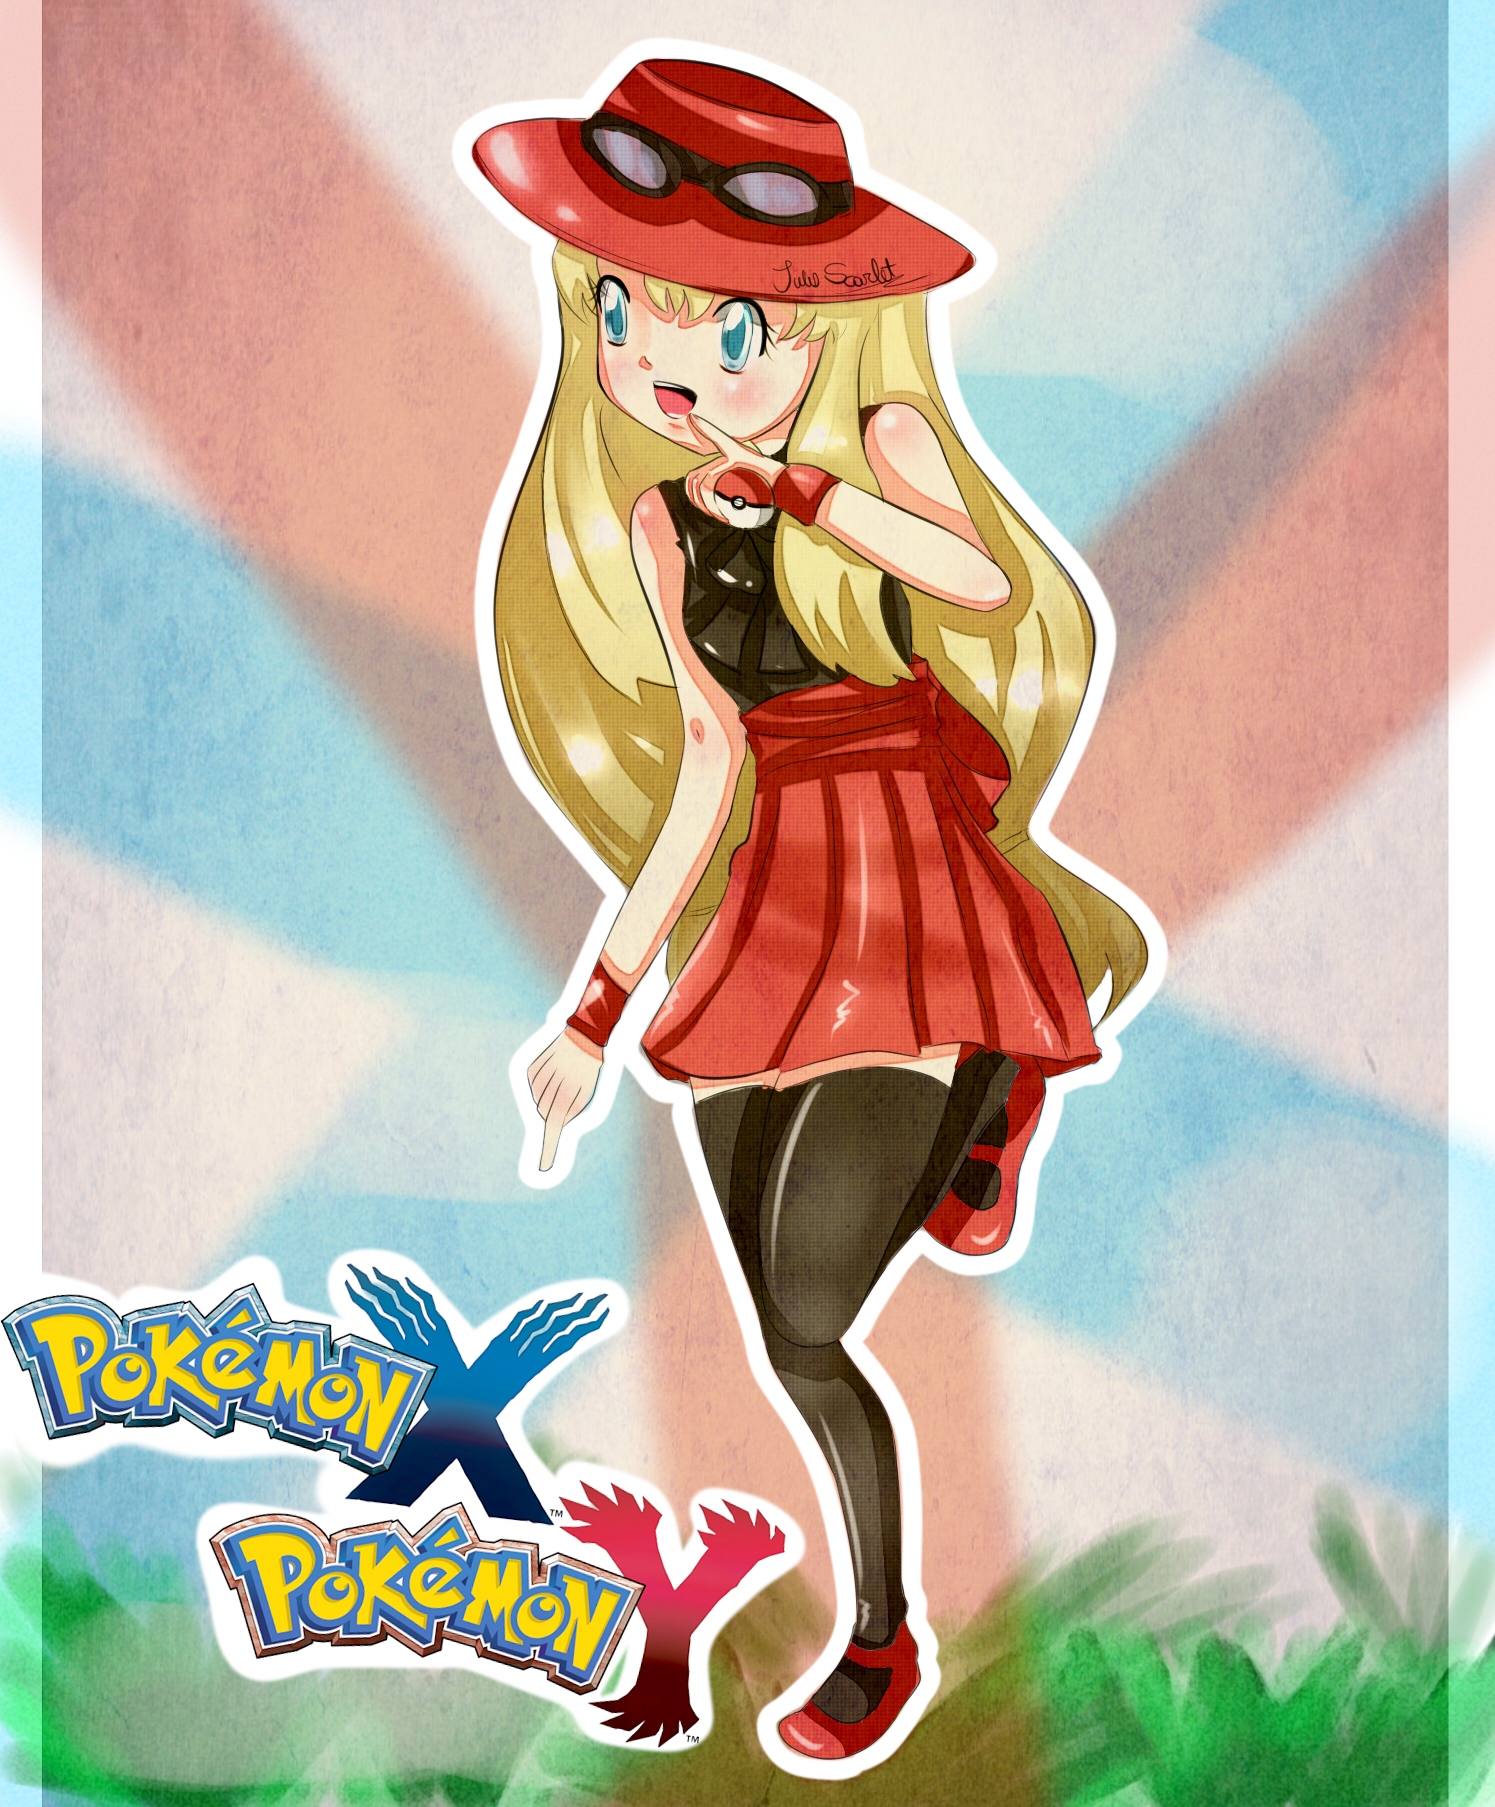 Pokemon x and y Female character by JulisScarlet on DeviantArt